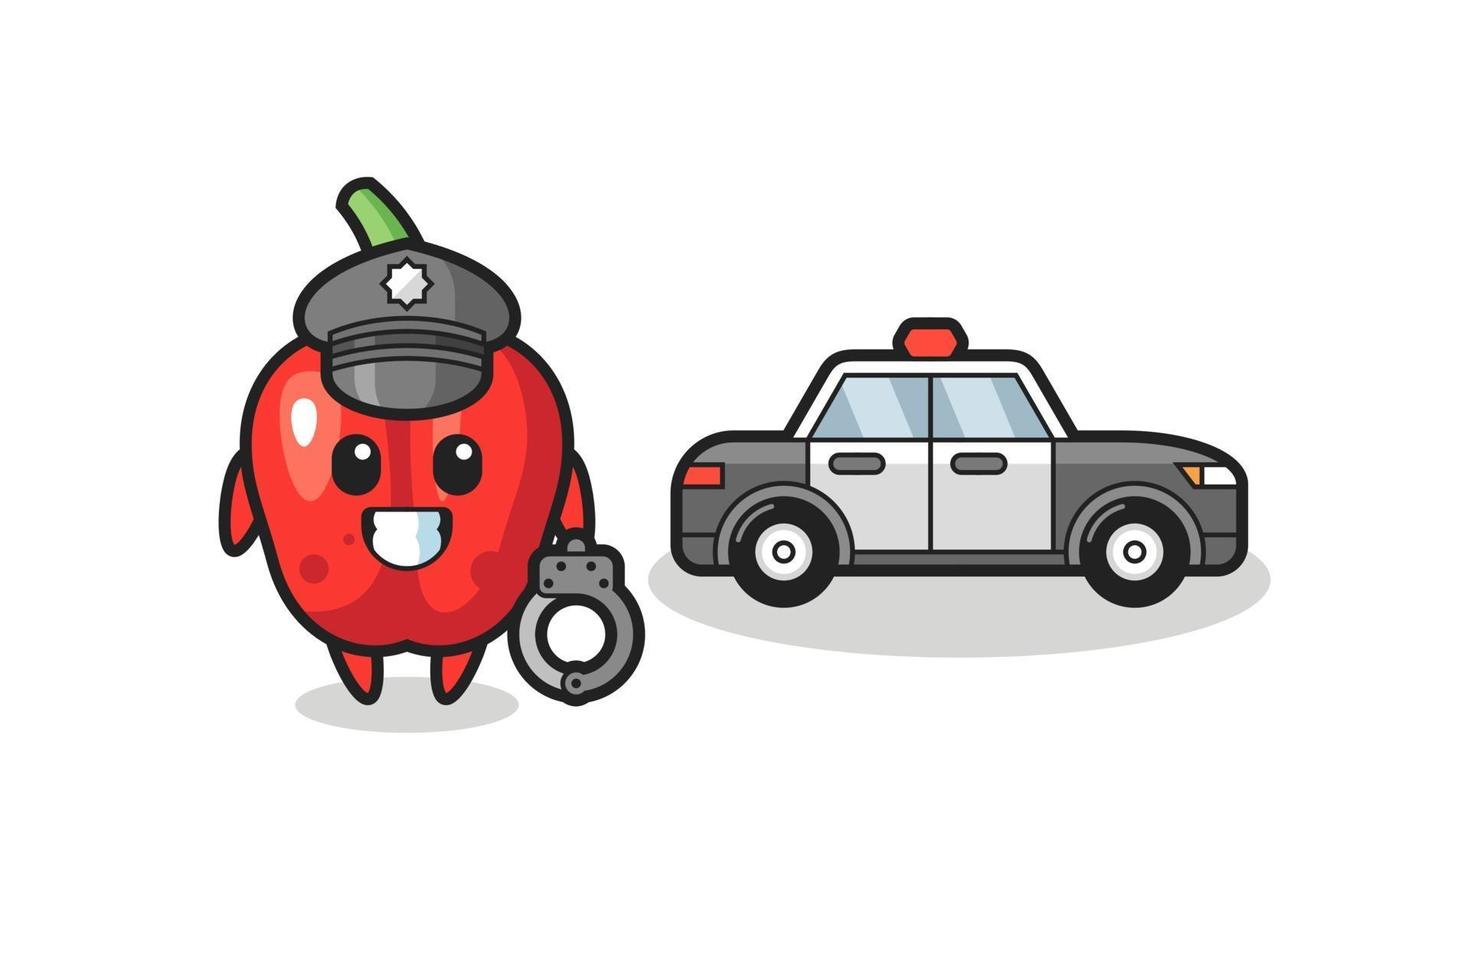 Cartoon mascot of red bell pepper as a police vector